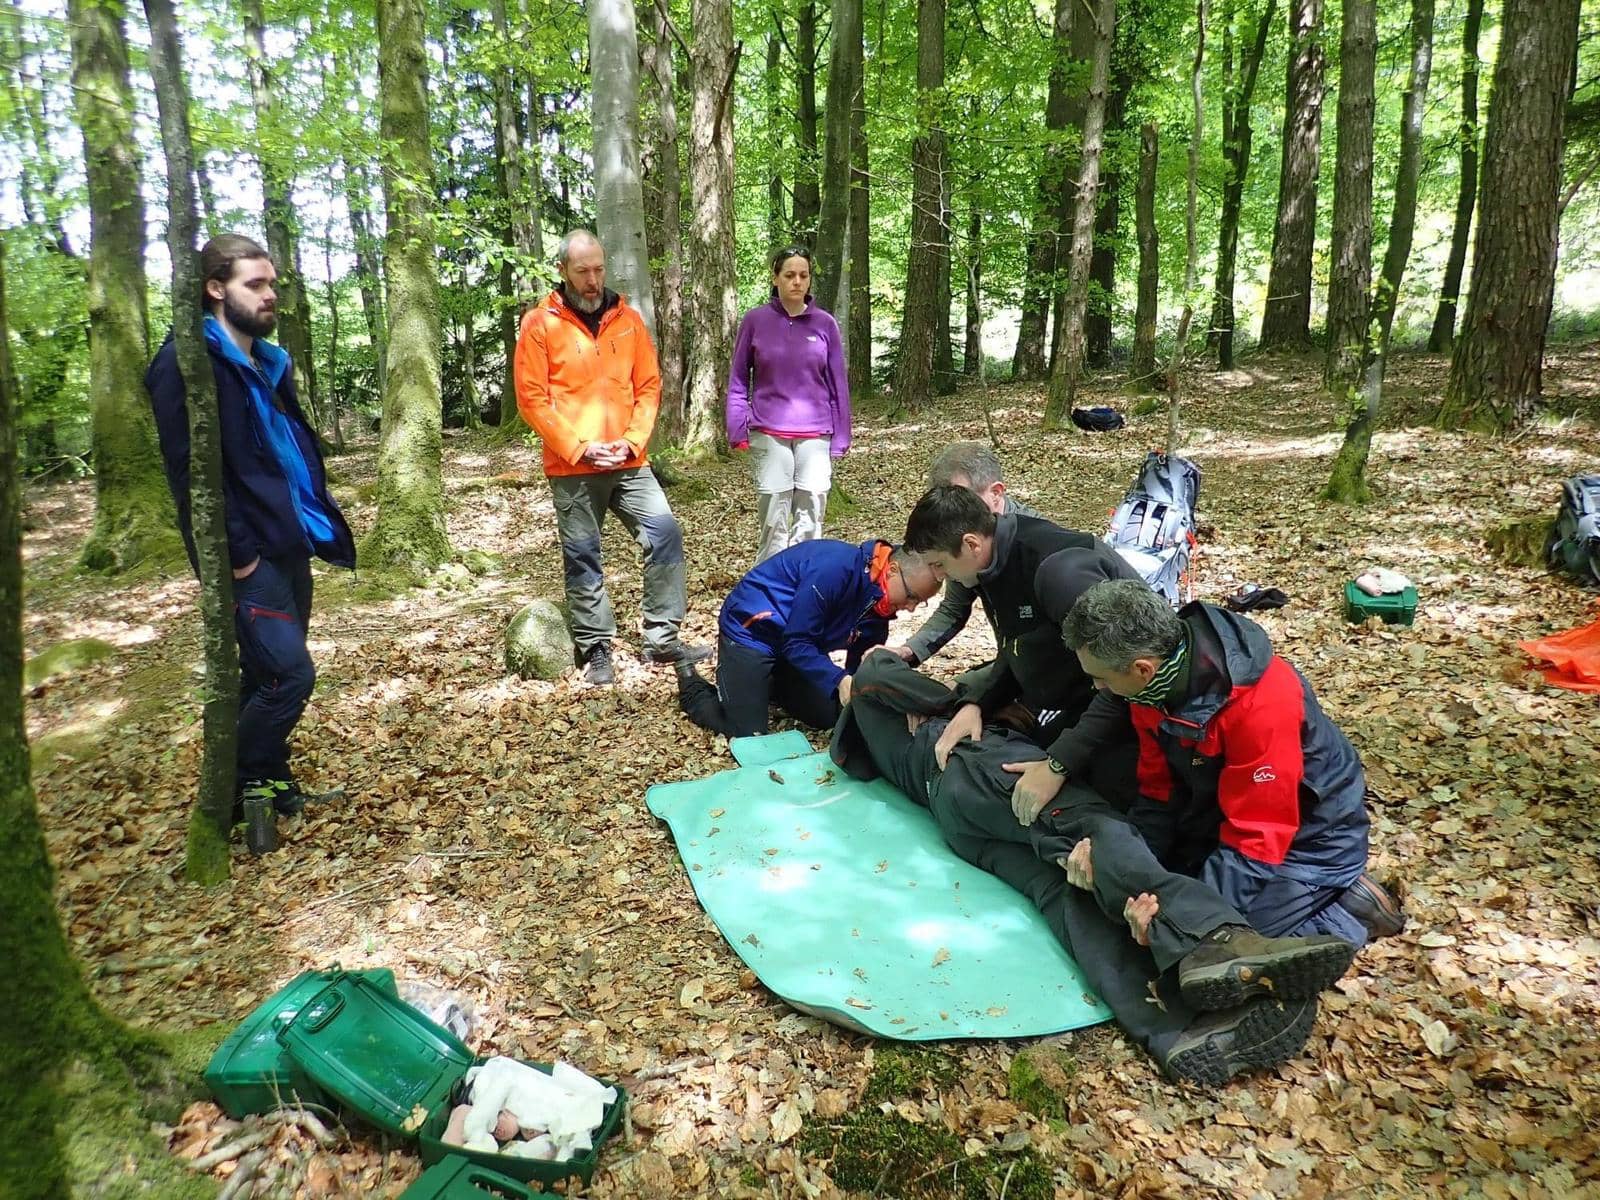 Hikers perform emergency first aid REC3 in forest